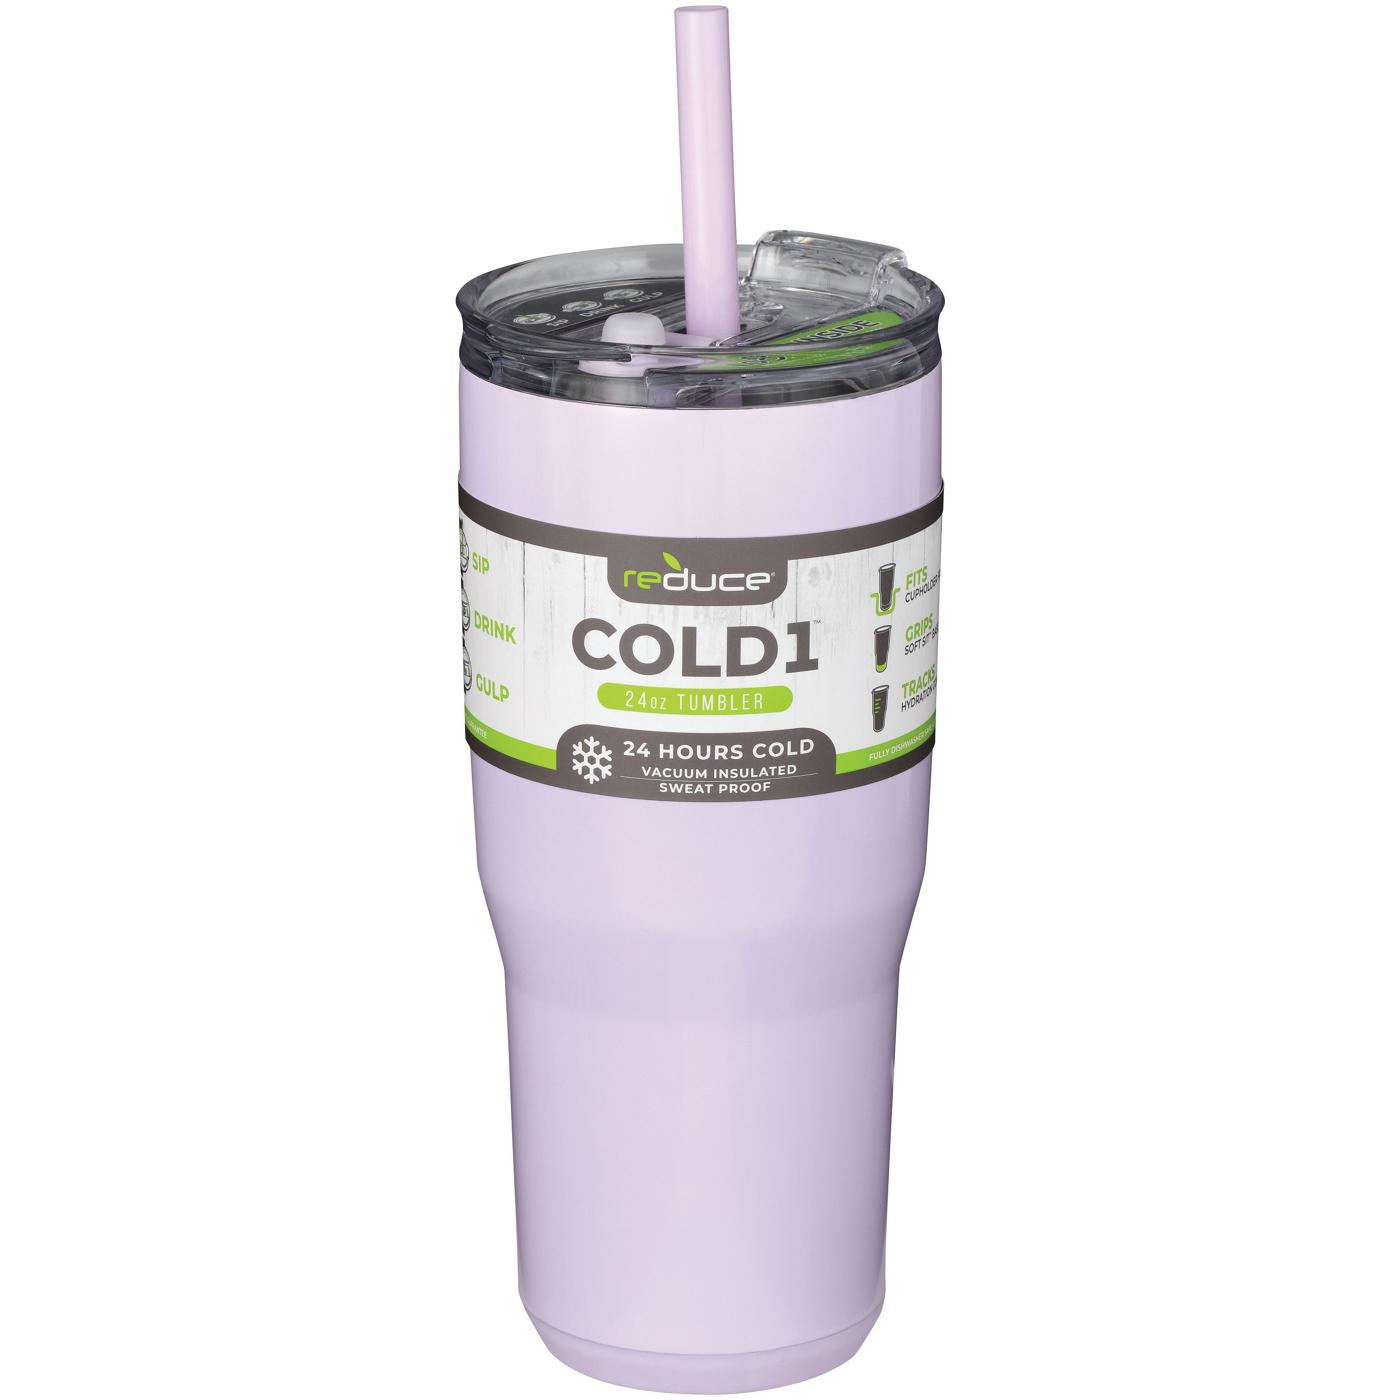 Reduce Cold1 Straw Tumbler - Lilac Bud; image 2 of 2